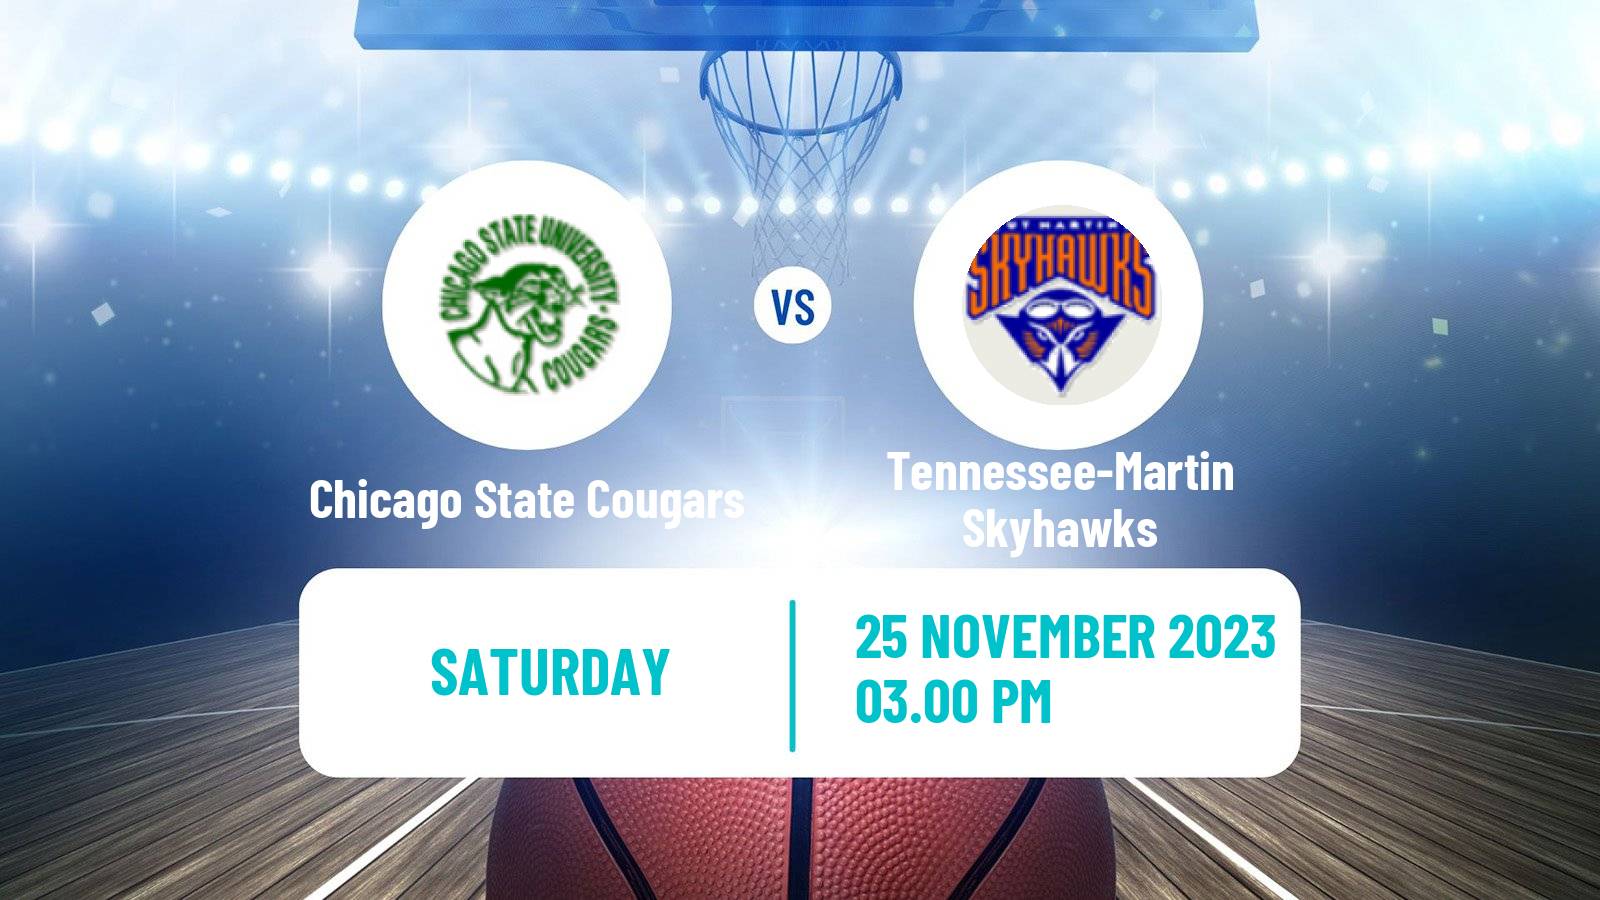 Basketball NCAA College Basketball Chicago State Cougars - Tennessee-Martin Skyhawks